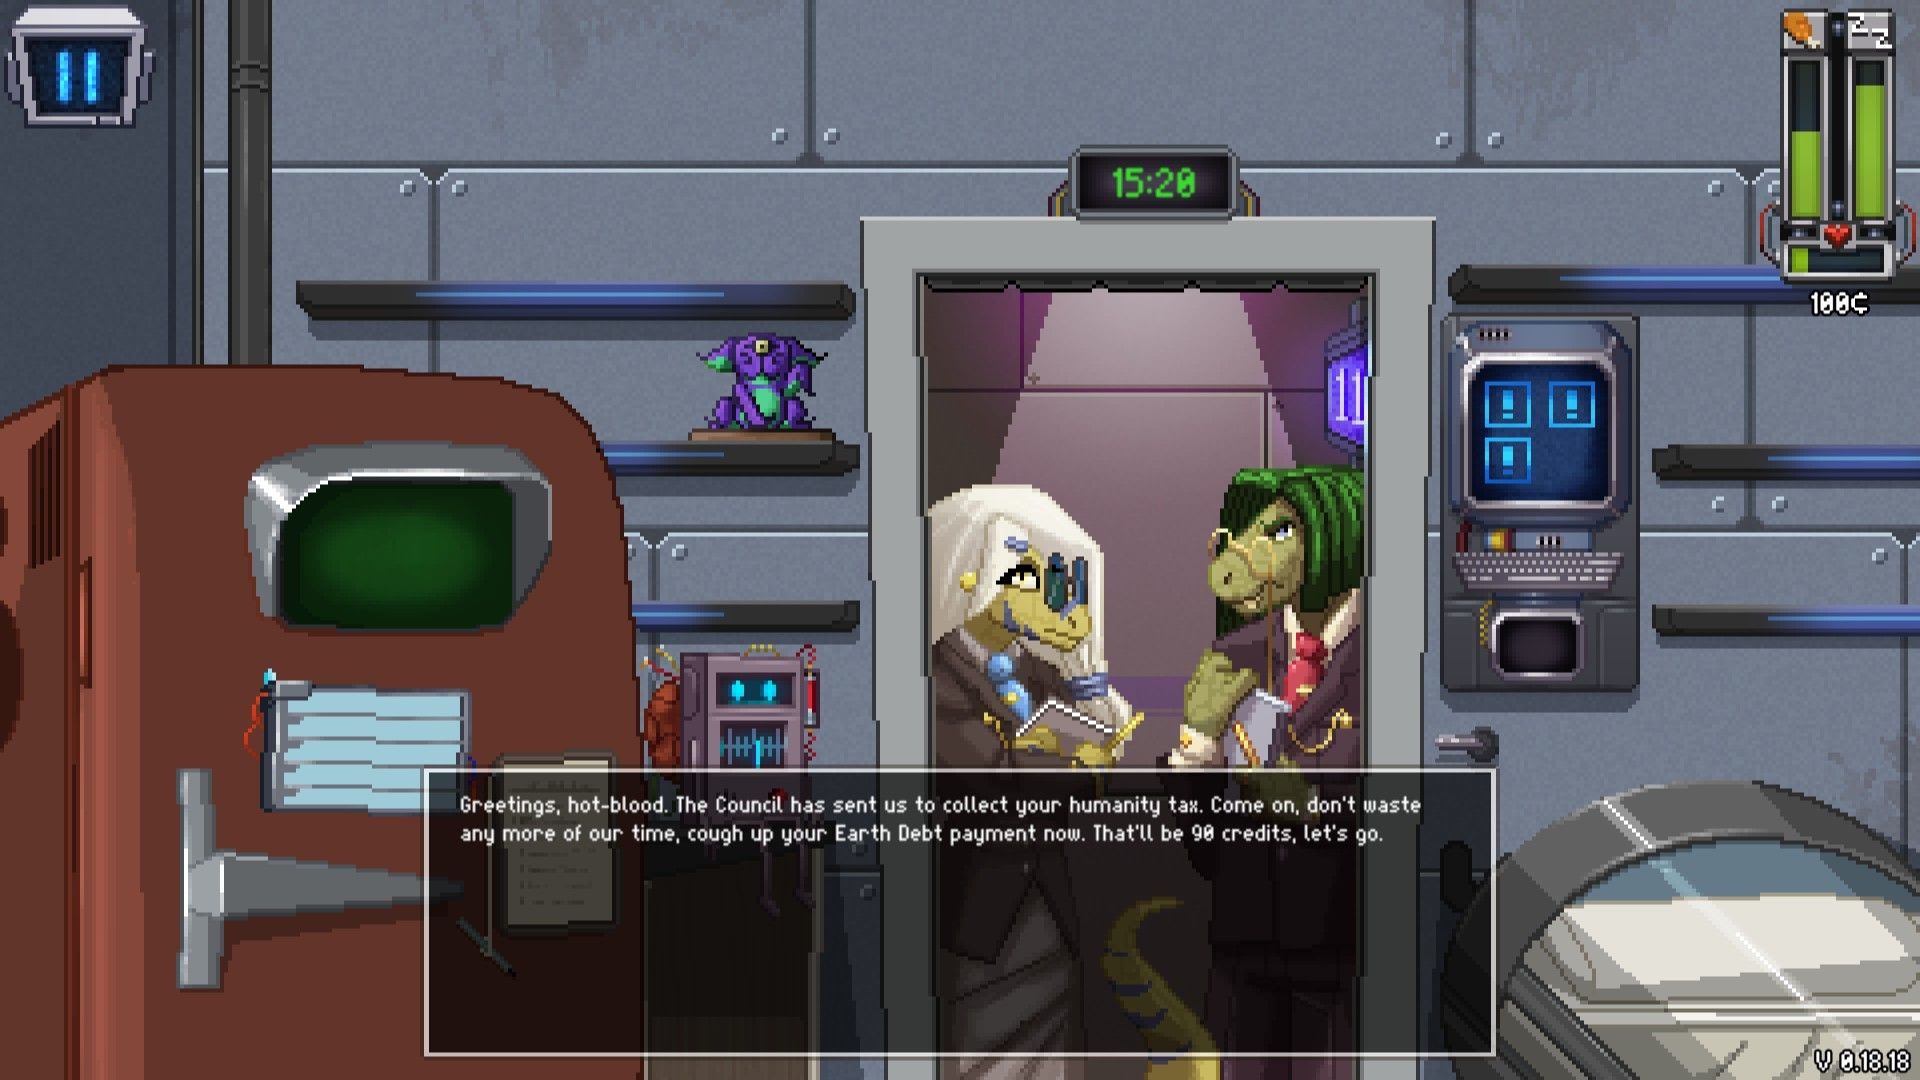 Two reptilians in DNFTM2099 at the player's door demanding they pay the Humanity Tax.